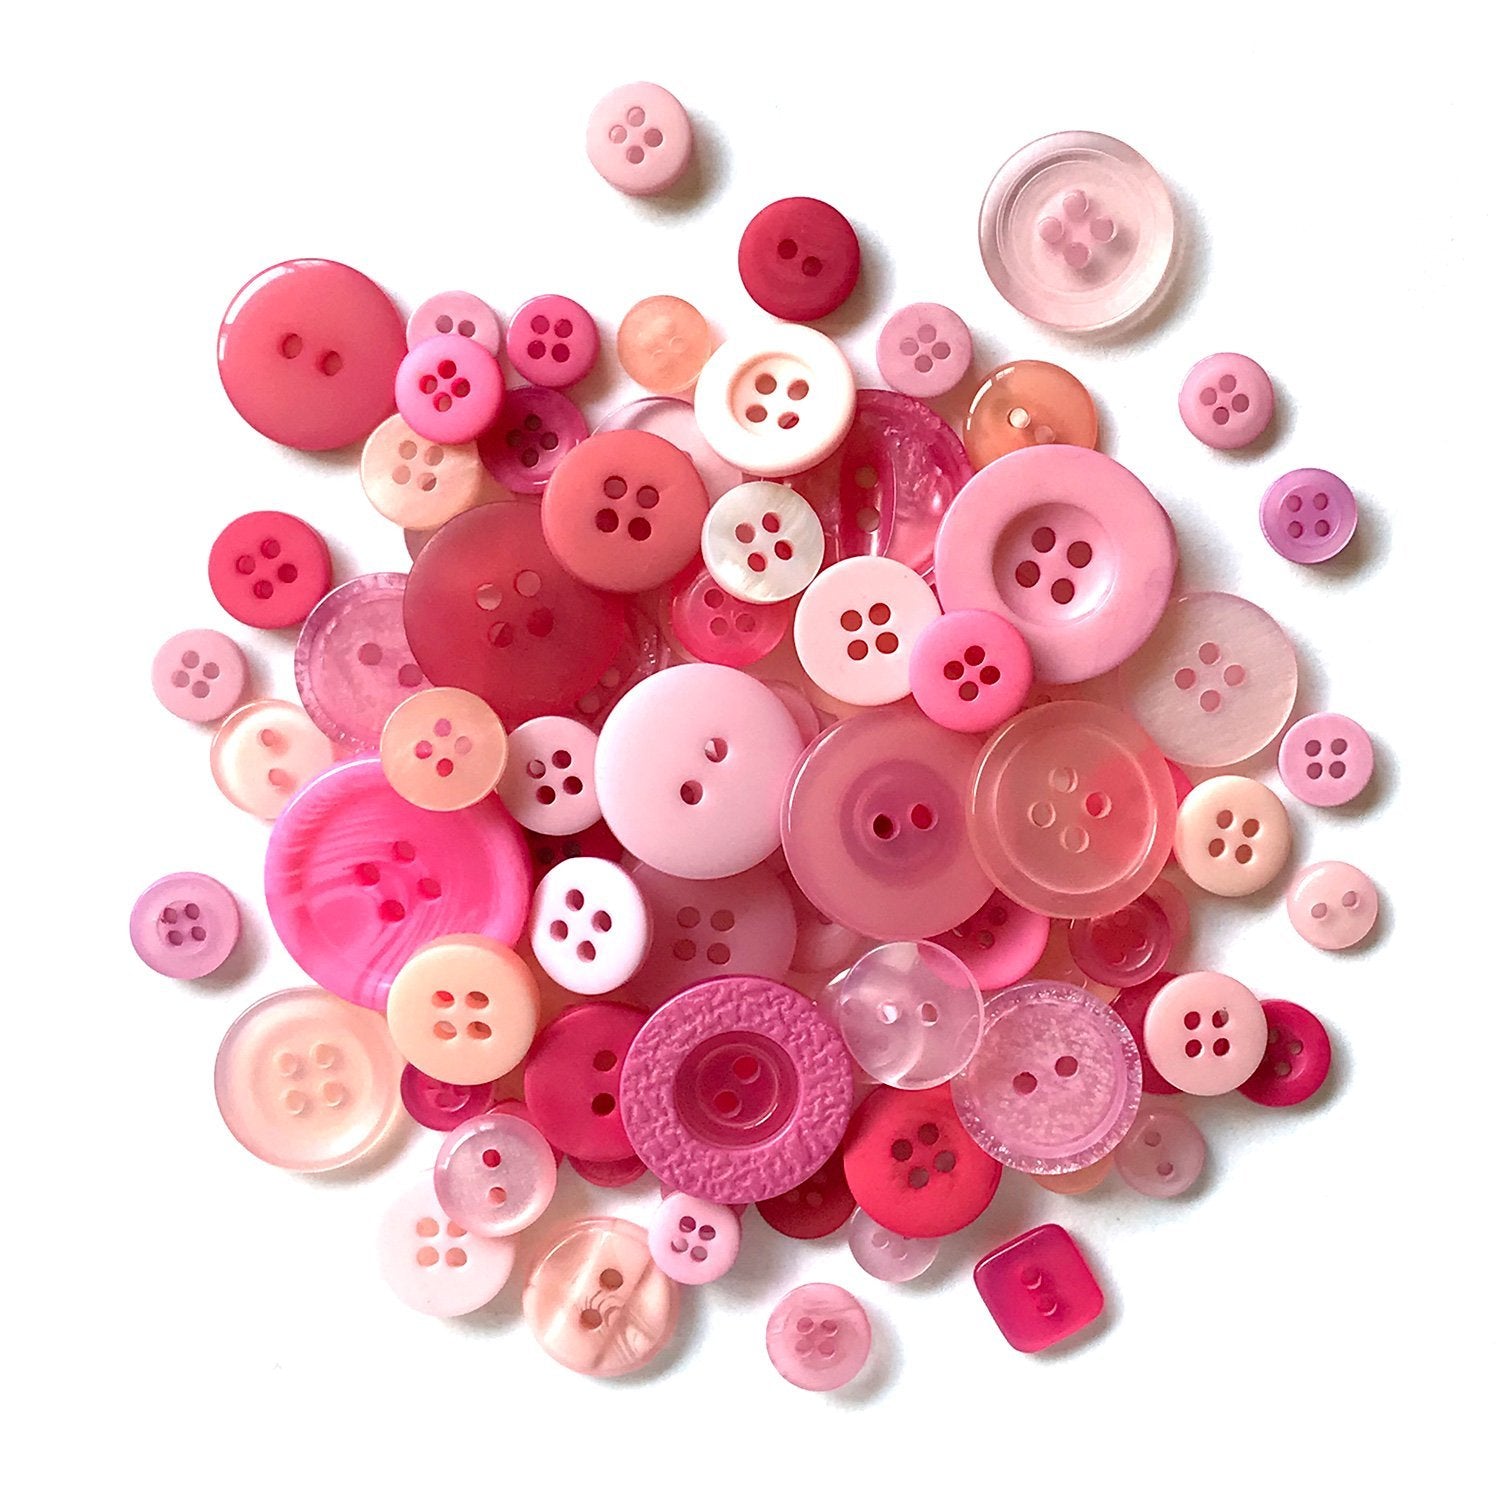 Buttons Galore Micro Buttons Primary